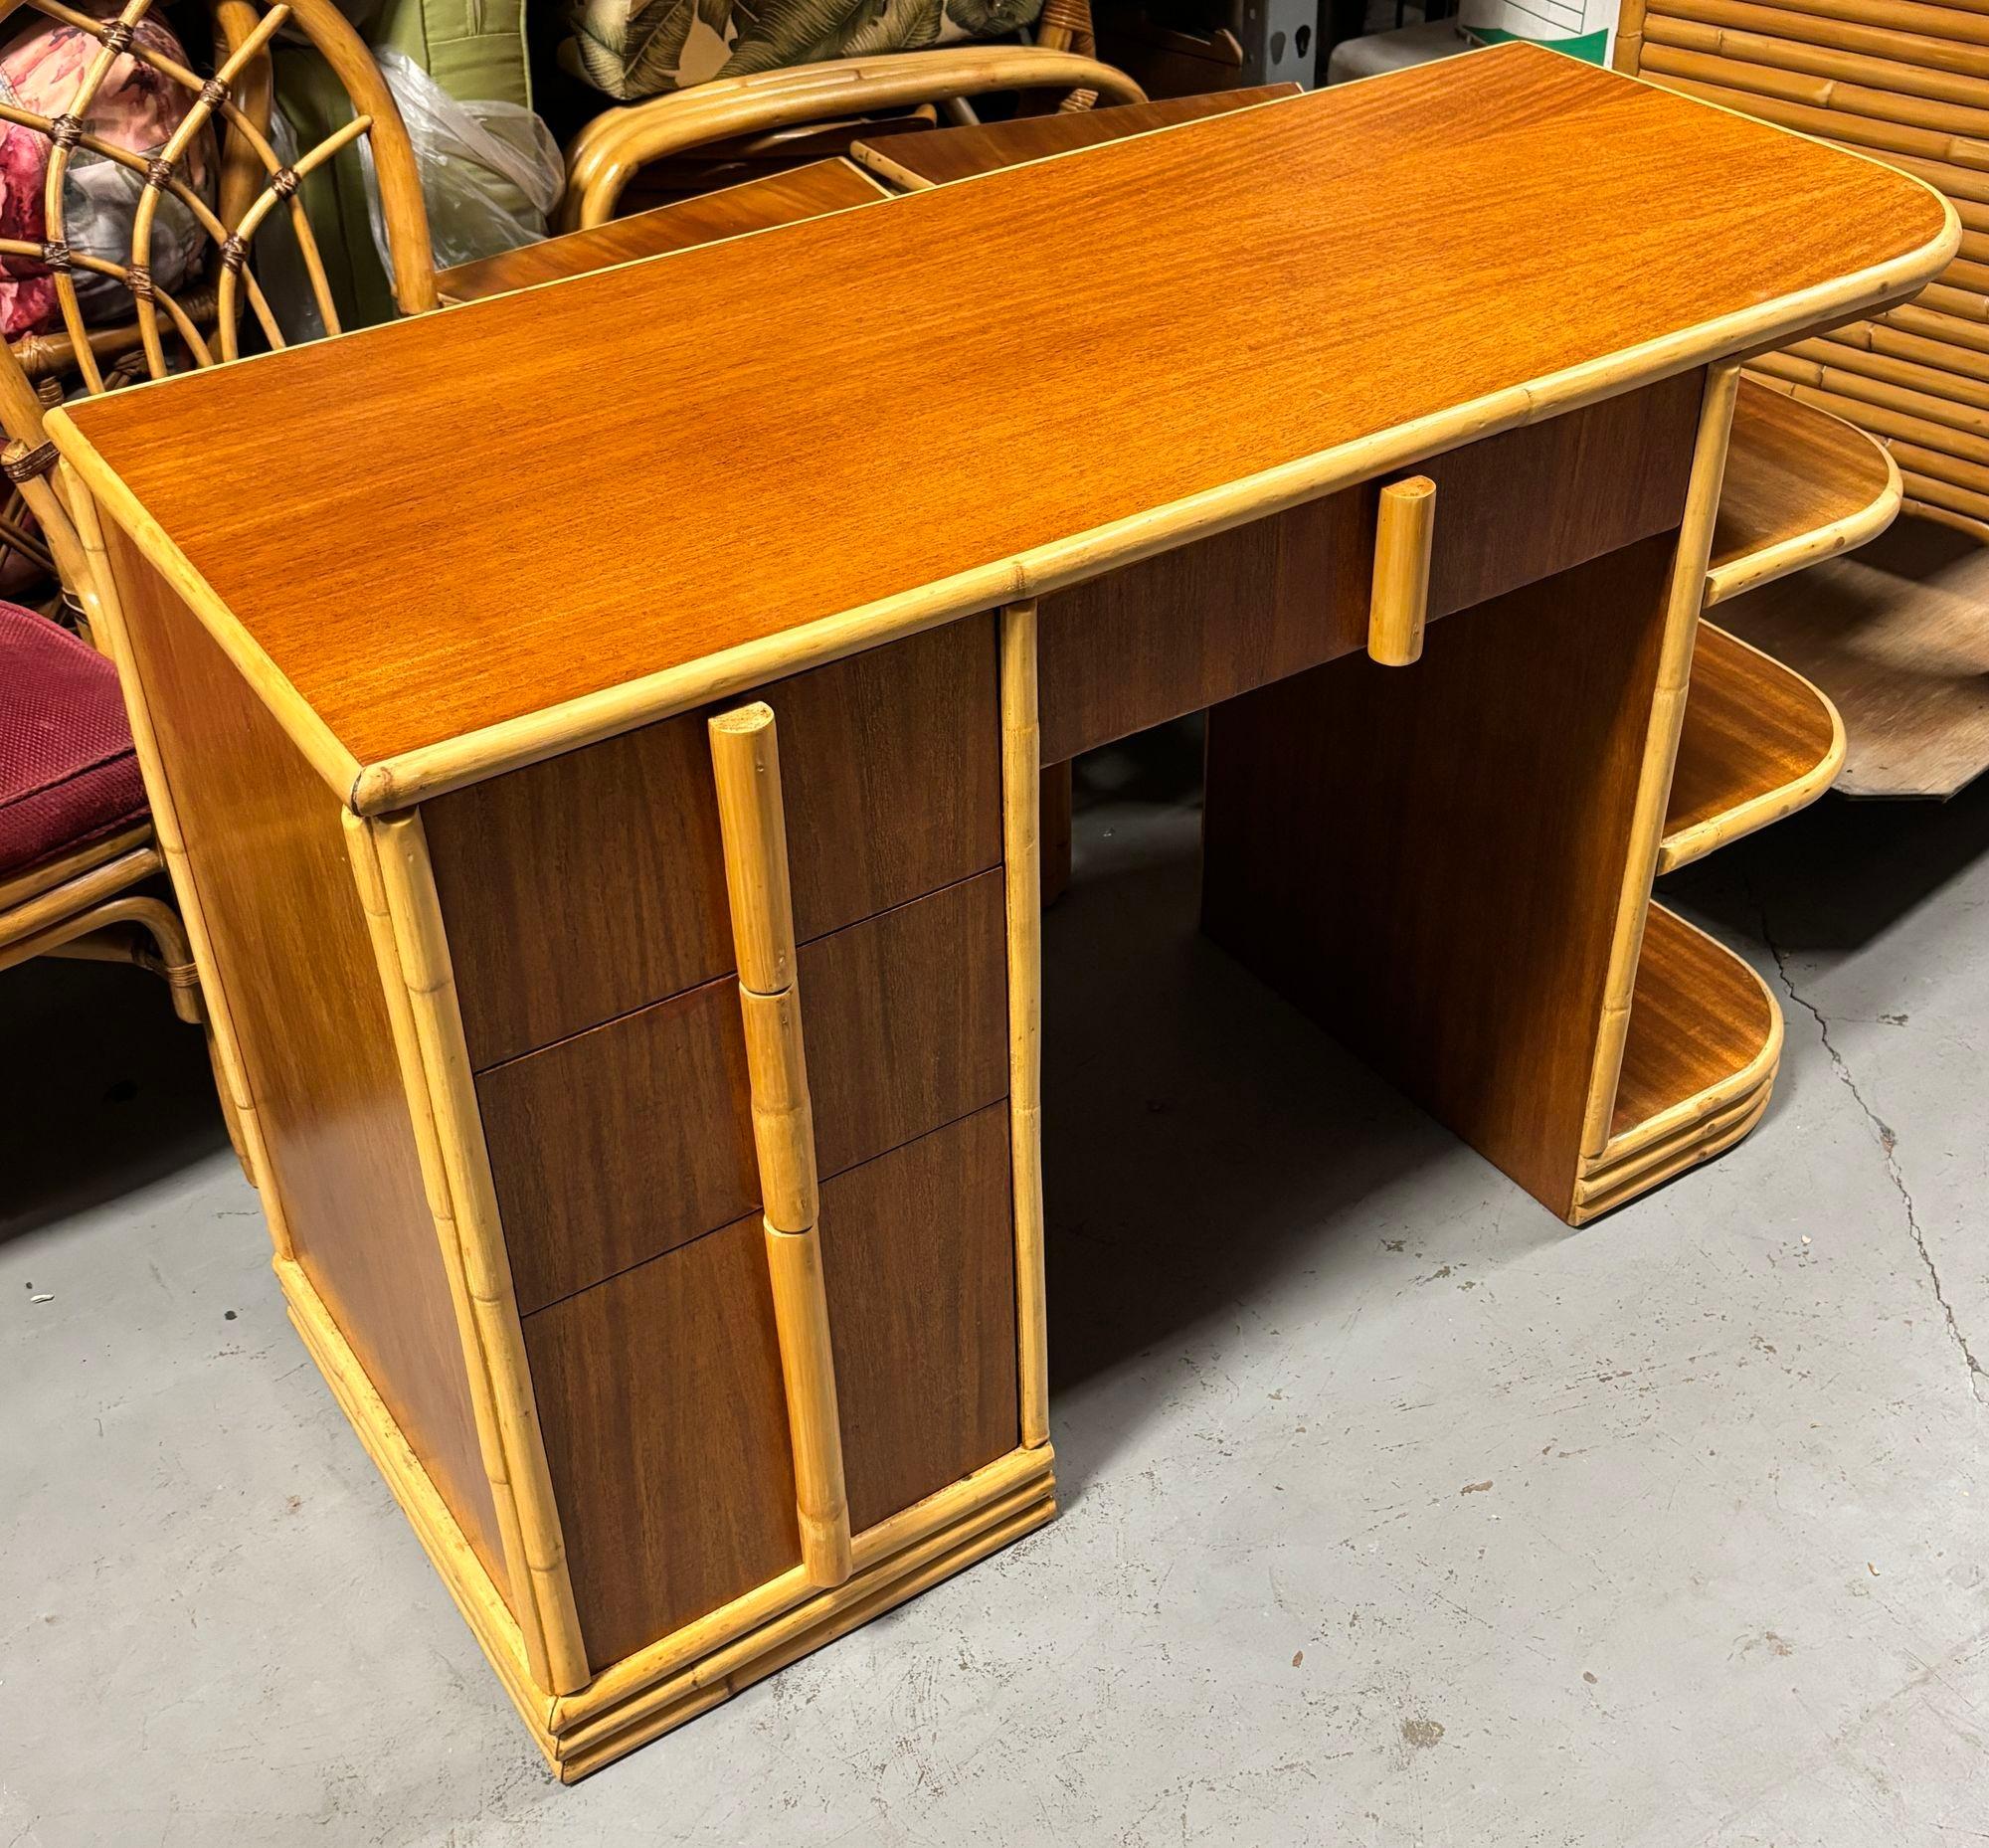 Streamline Art Deco rattan writing desk with a rattan border, Mahogany sides, and top with four pull drawers and 3-tier side shelf along the side. 

Restored to new for you.

Tropical Sun Rattan was started in 1934 at 117 West Colorado Blvd in